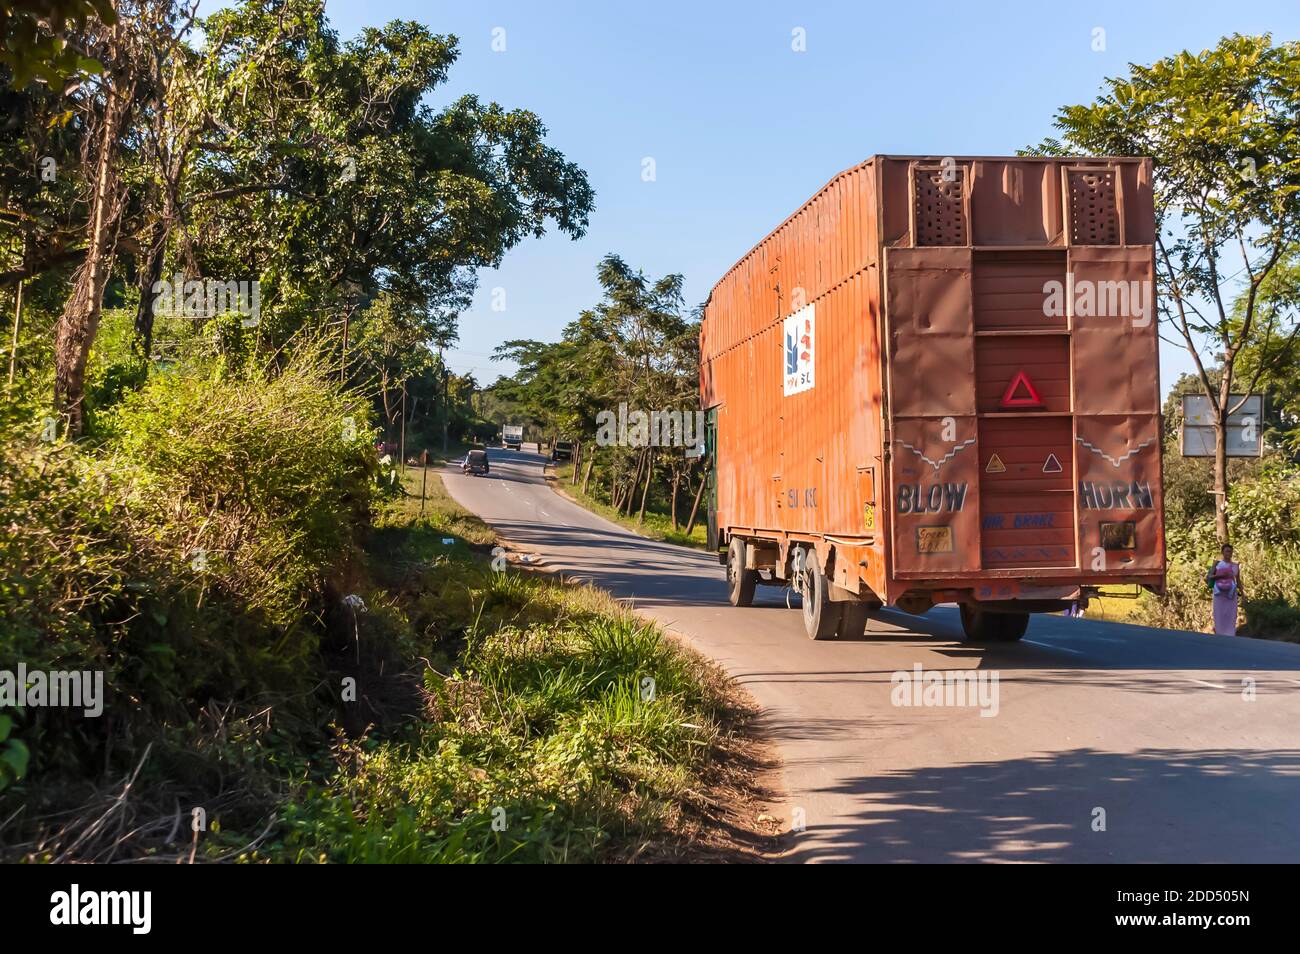 A covered car transporter for Maruti cars on the Shillong-Guwahati highway, Meghalaya, India. Stock Photo